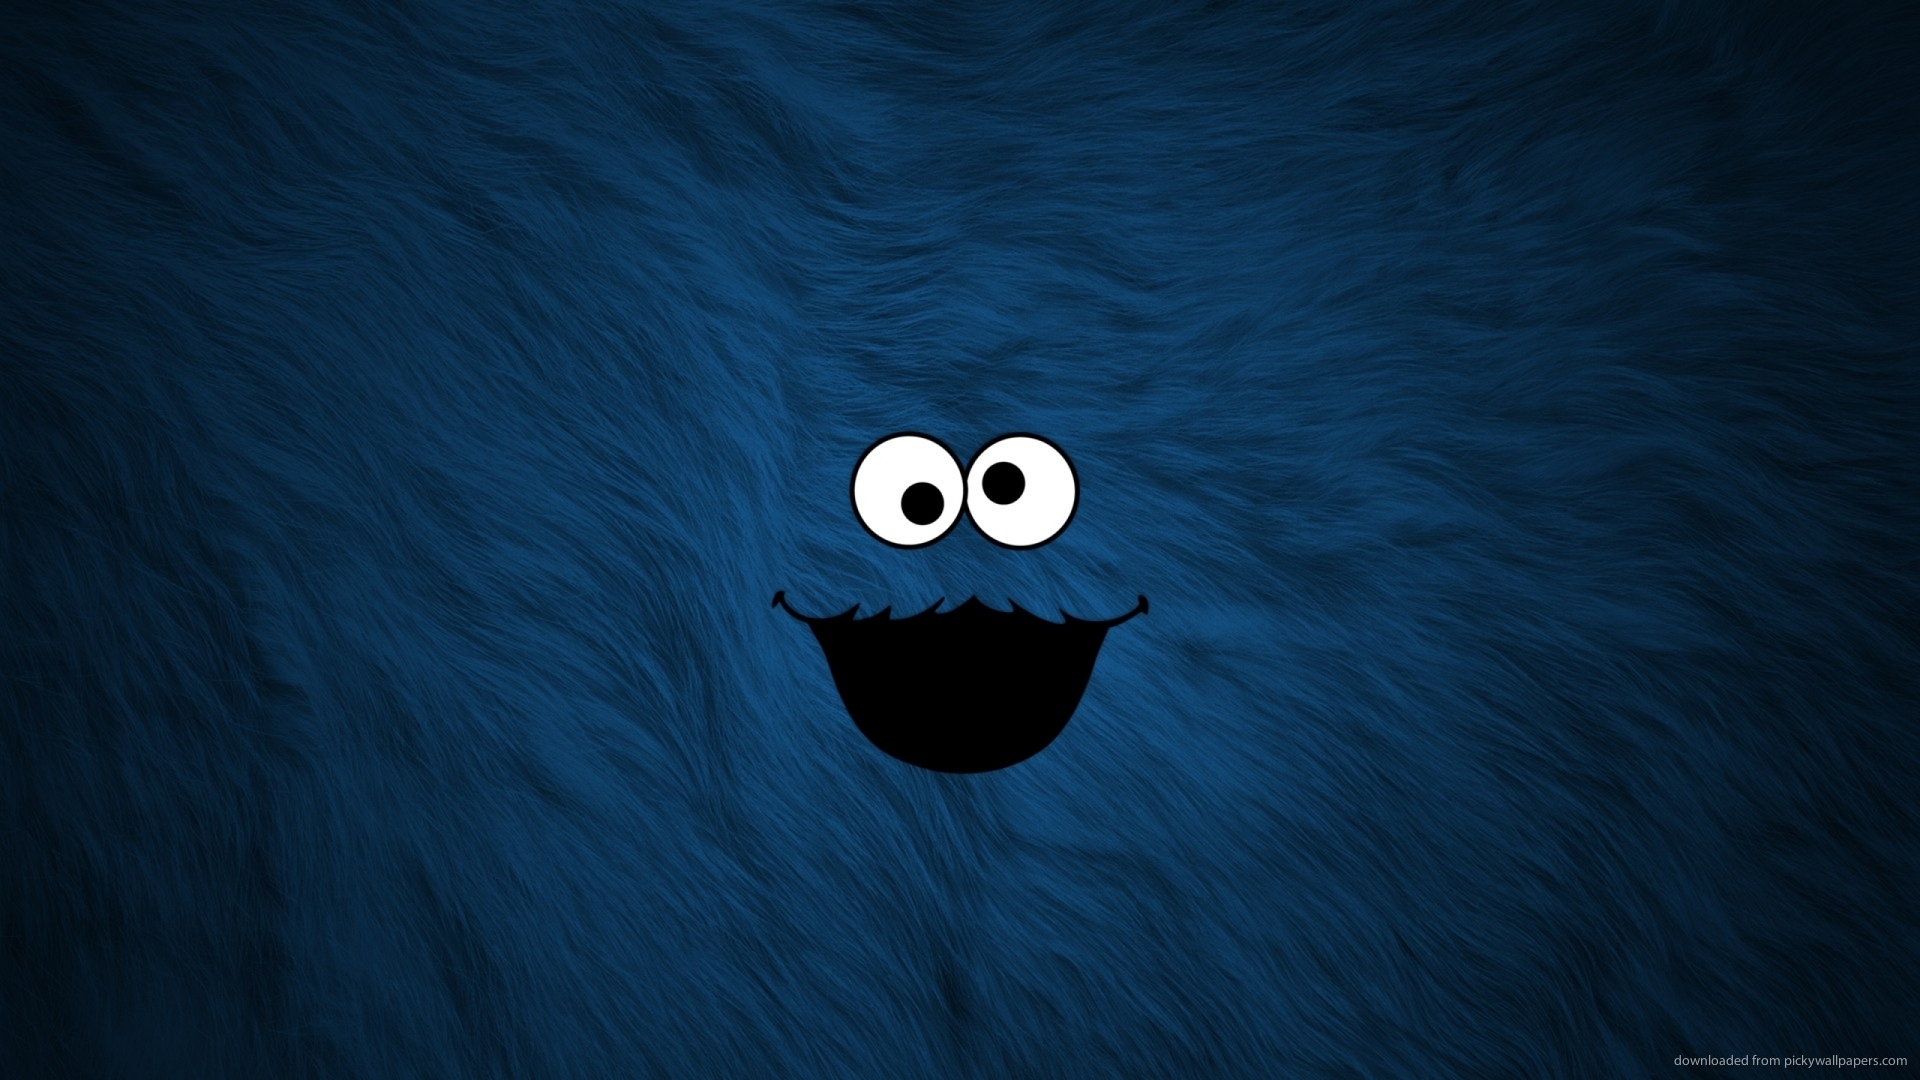 Cookie Monster Fur Wallpaper For Samsung Galaxy Tab